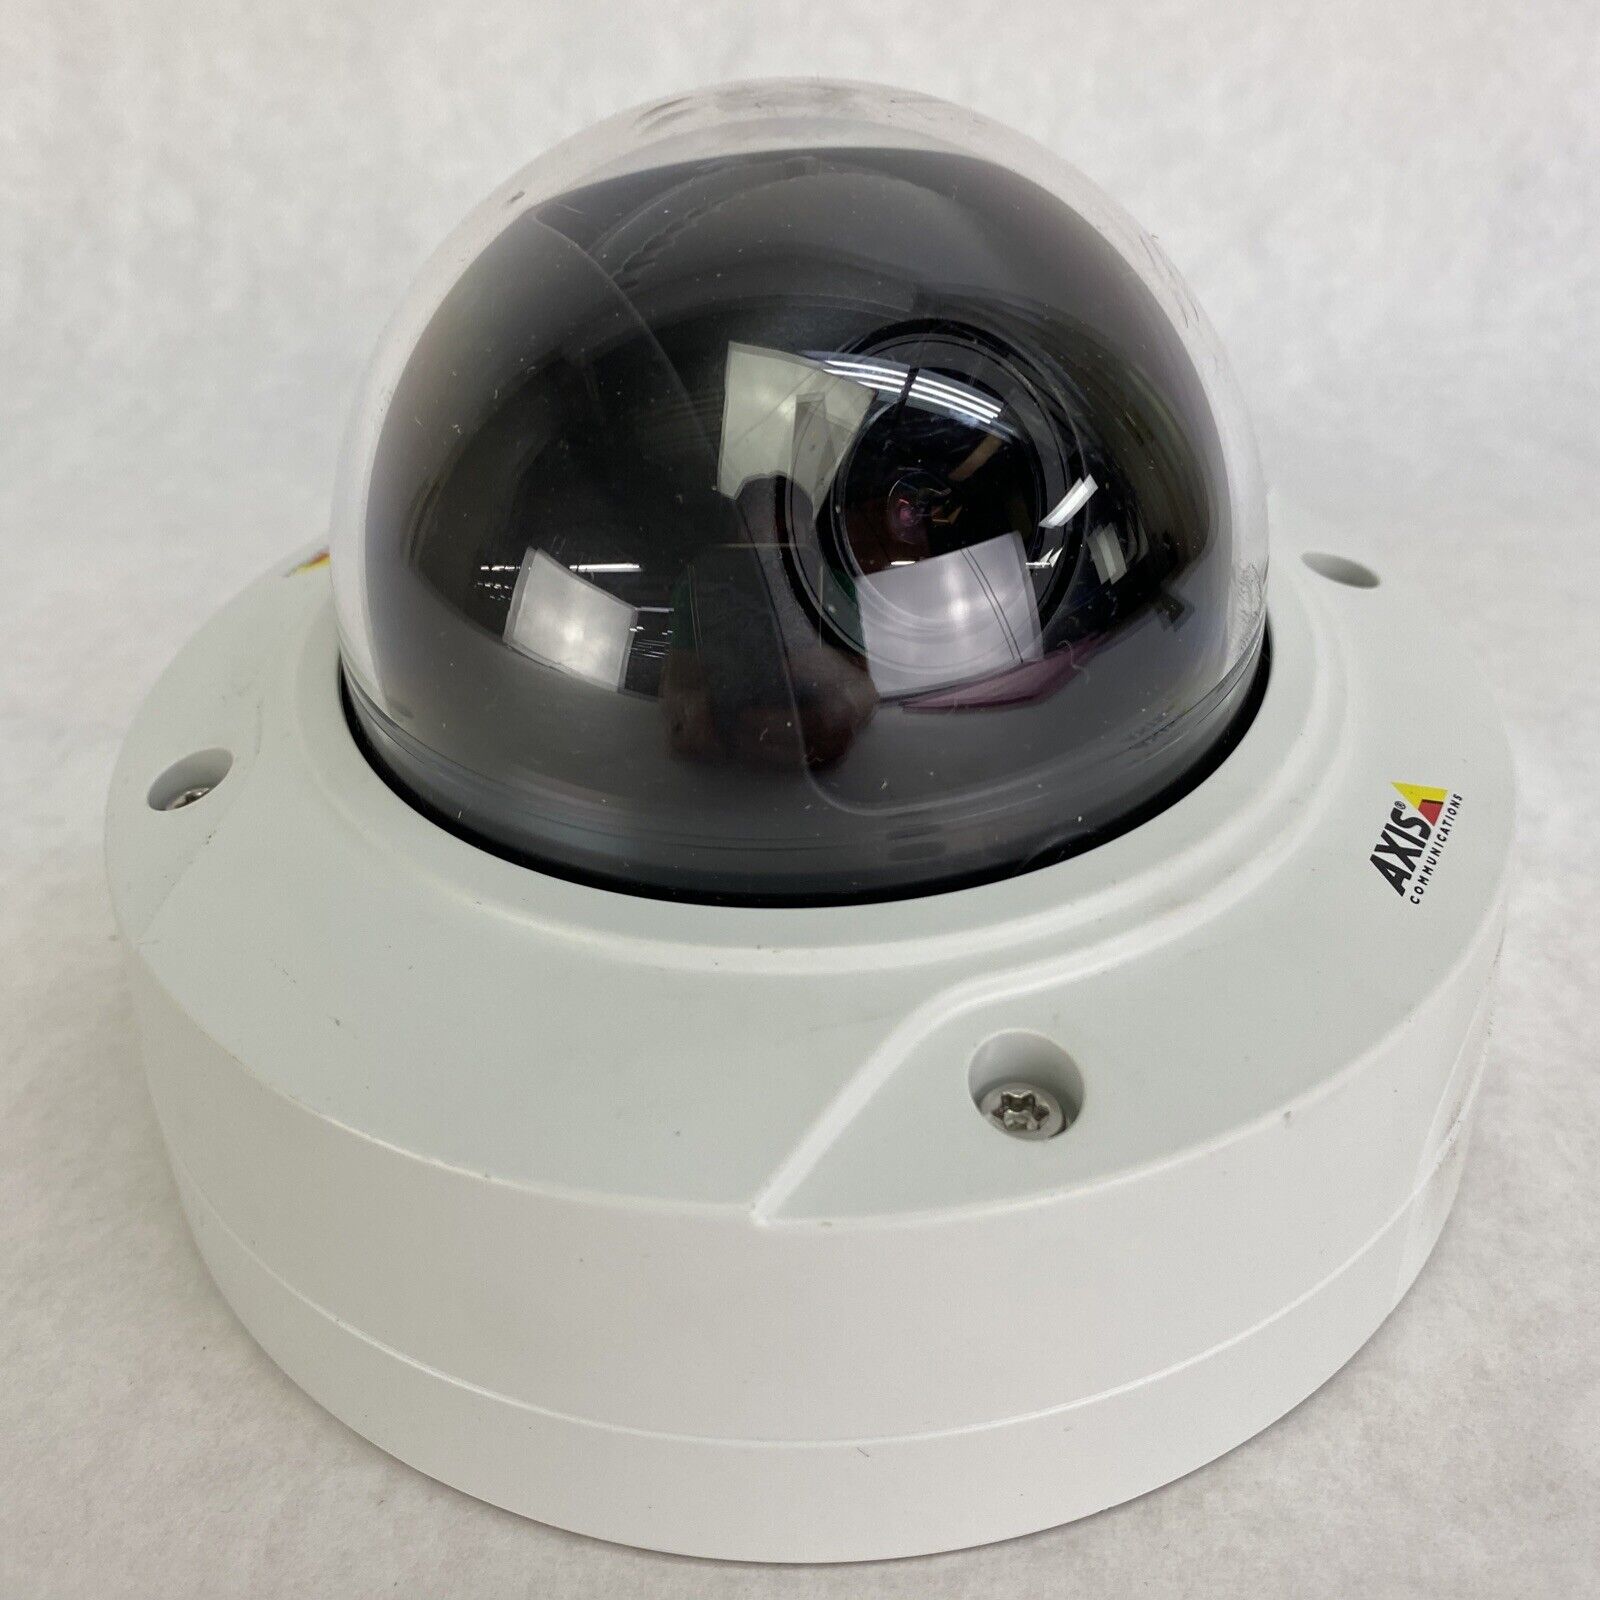 AXIS M1013 CCTV Camera TESTED